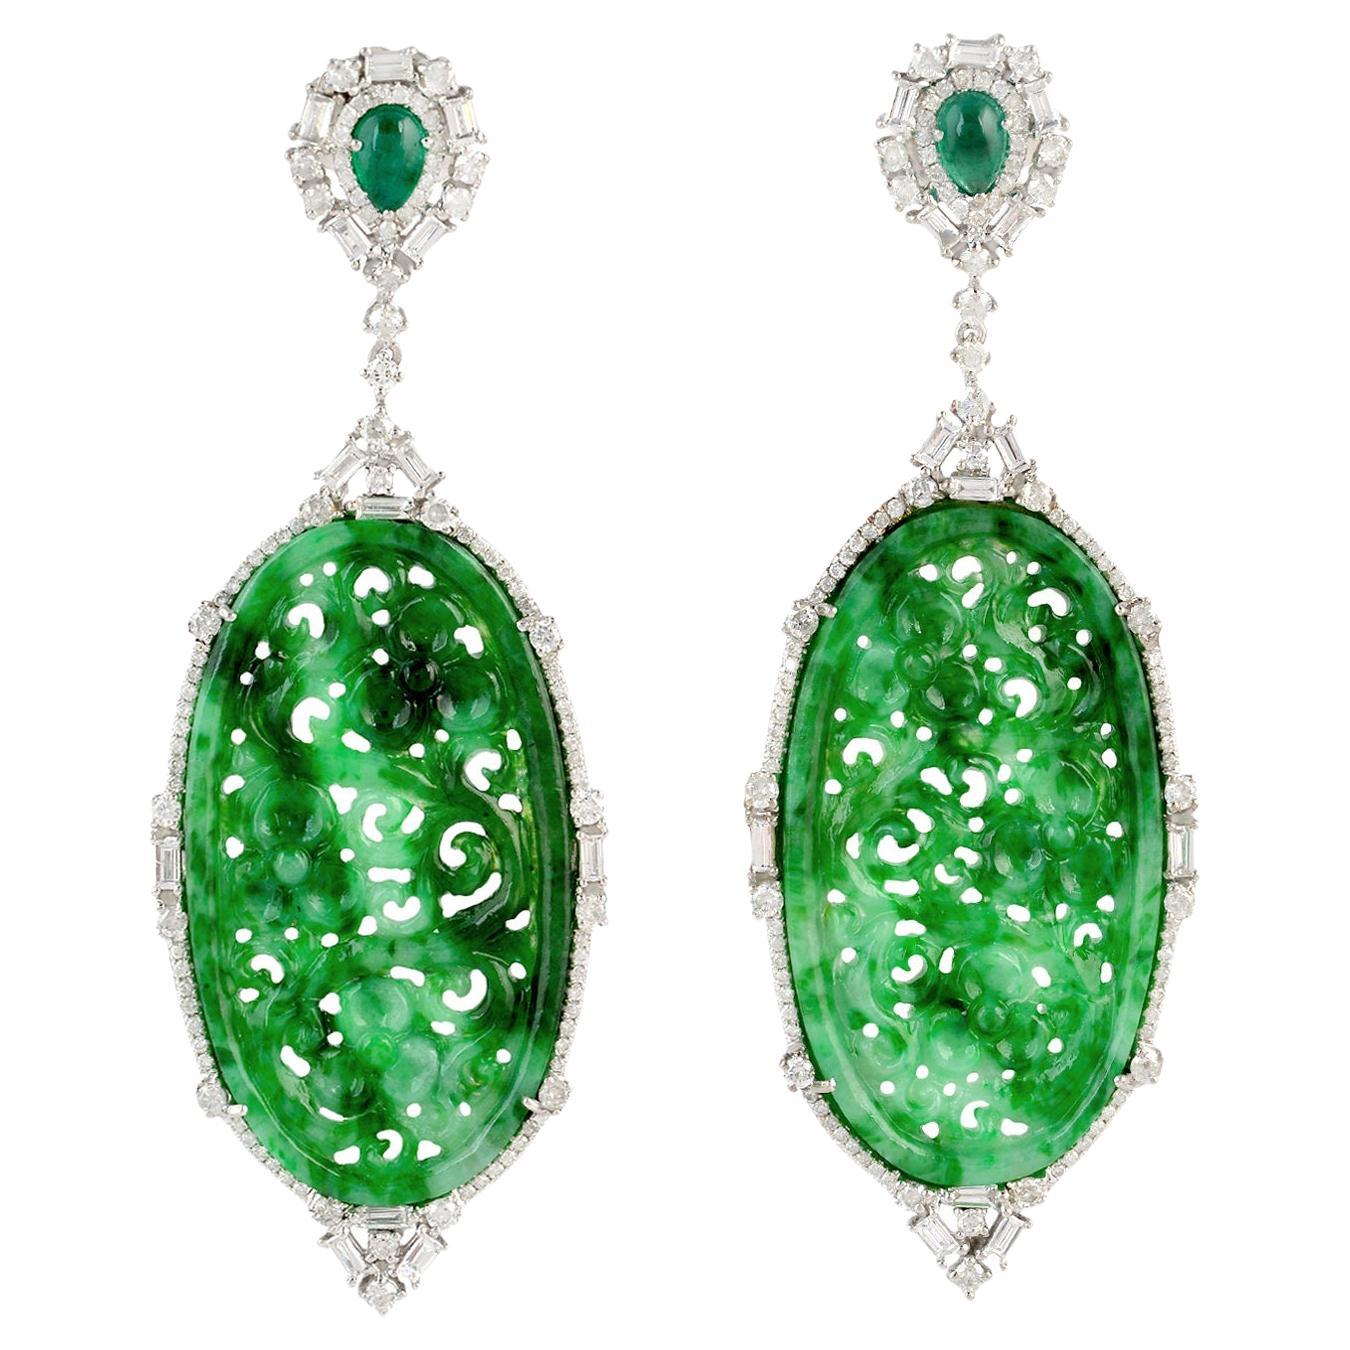 37.76ct Carved jade Dangle Earrings With Diamonds & Emerald In 18k White Gold